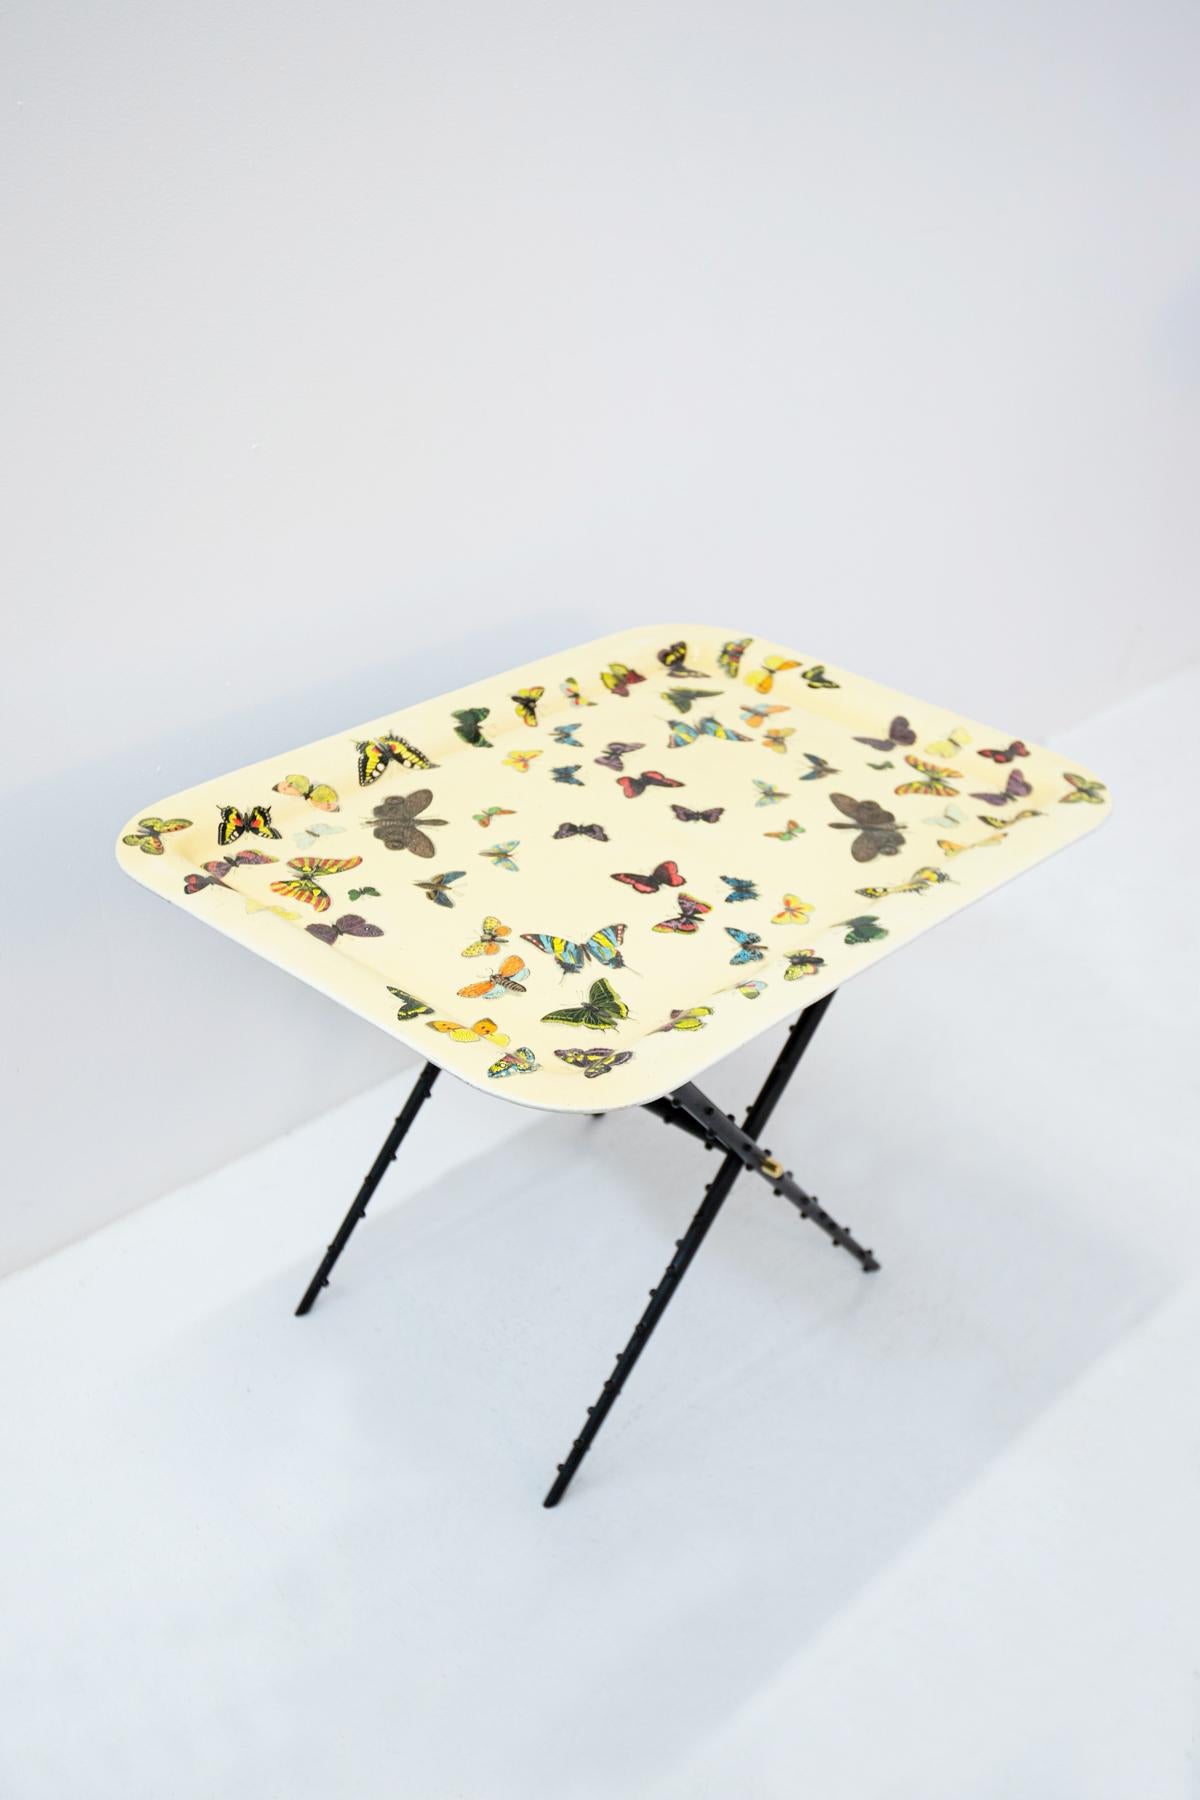 Iconic coffee table by Piero Fornasetti and produced by Atelier Fornasetti in 1950. The coffee table has original label under its top. The table top is made of a silkscreened aluminum tray with a yellow background. Its iconic screen printing